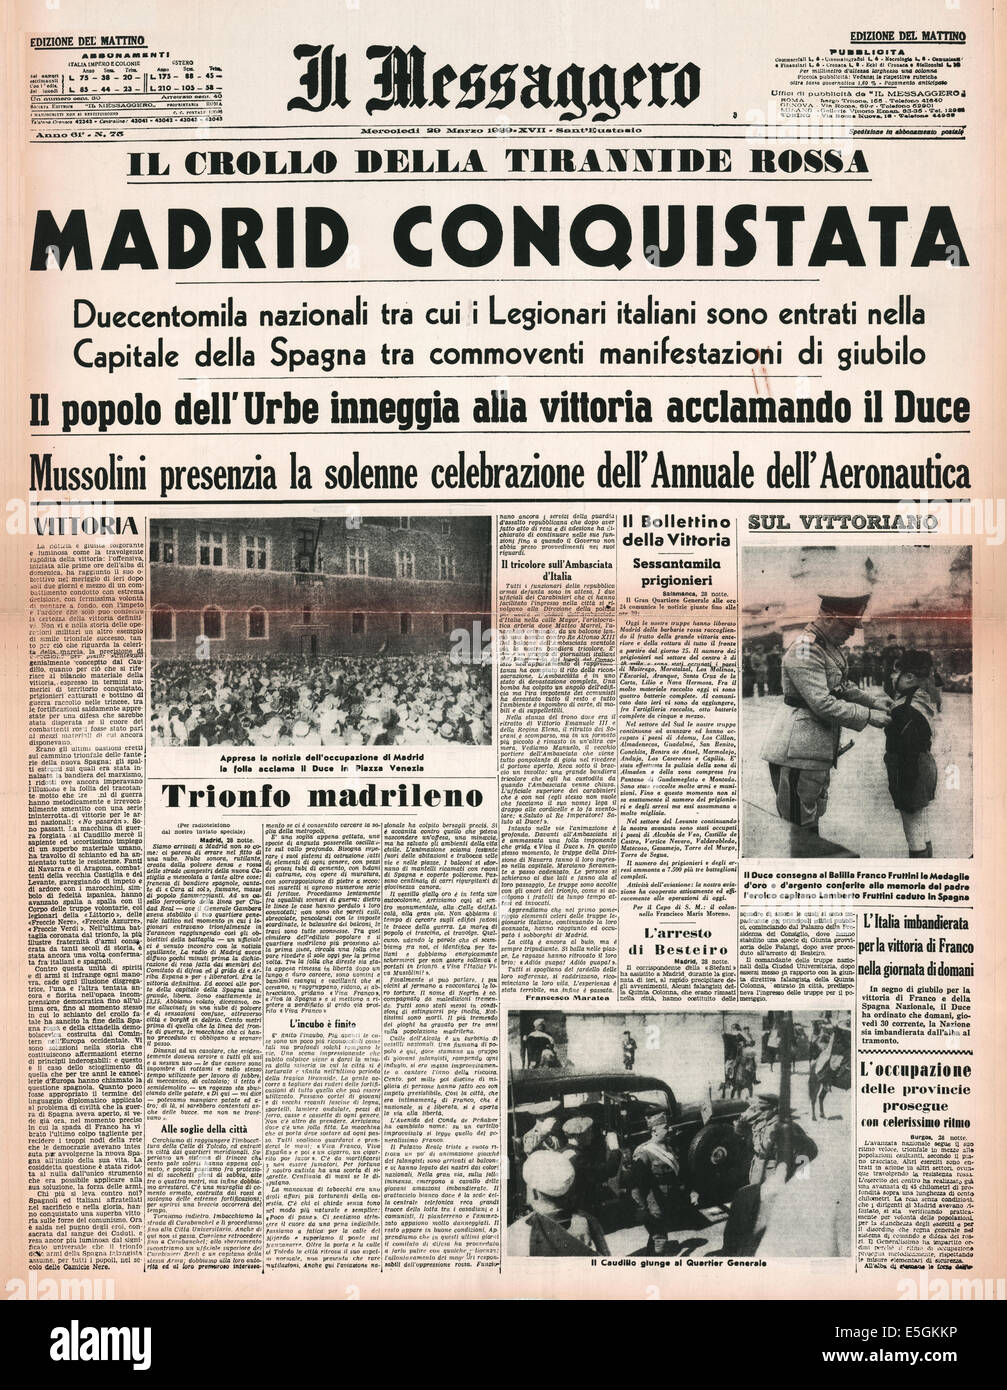 1939 Il Messaggero (Italy) front page reporting the surrender of Madrid during the Spanish Civil War Stock Photo